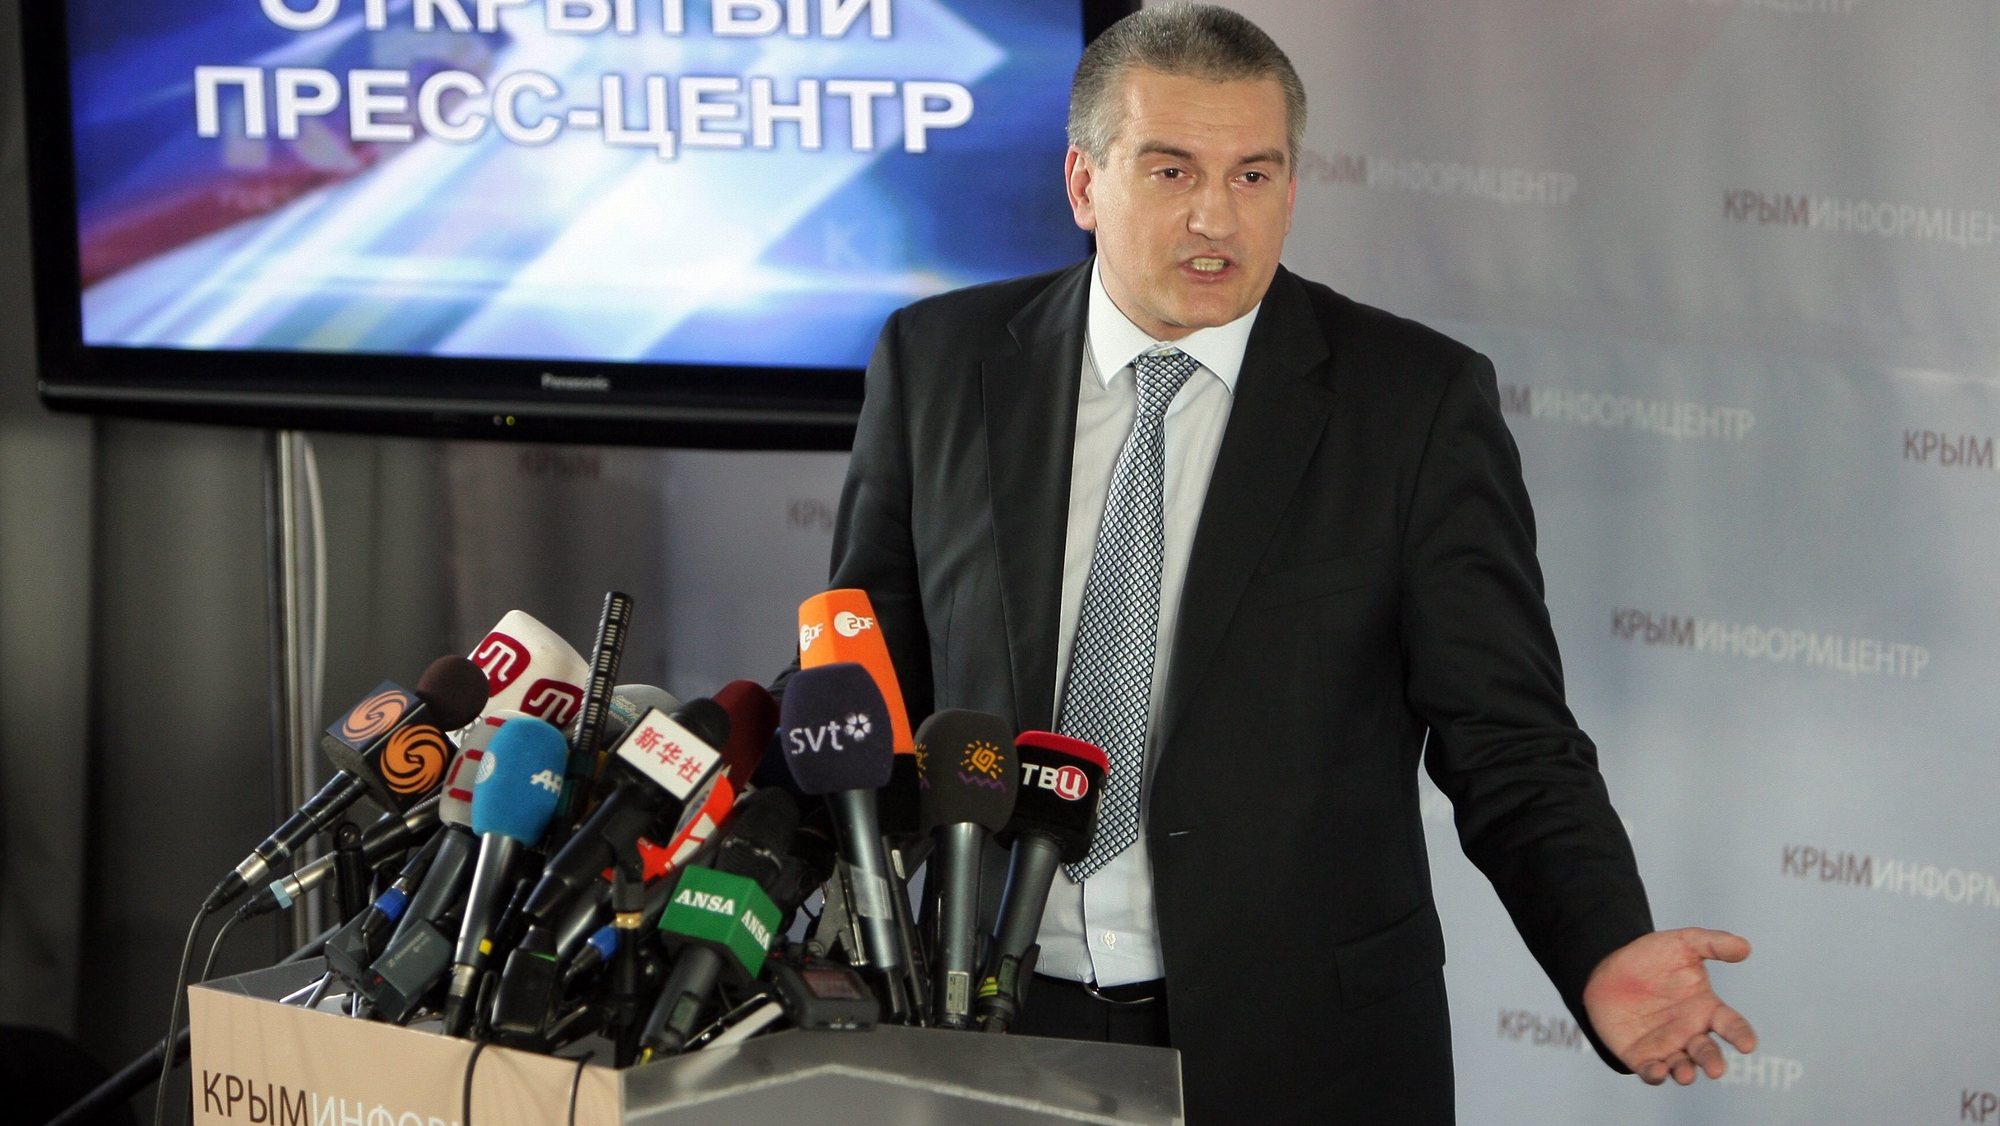 epa04125611 Crimean Prime Minister Sergey Aksyonov speaks during a news conference in Simferopol, Crimea, Ukraine, 14 March 2014. Aksyonov said that Crimea would not declare independence but should join Russia as a Russian region. The all-Crimean referendum on the Crimean status will be held on 16 March.  EPA/ARTUR SHVARTS